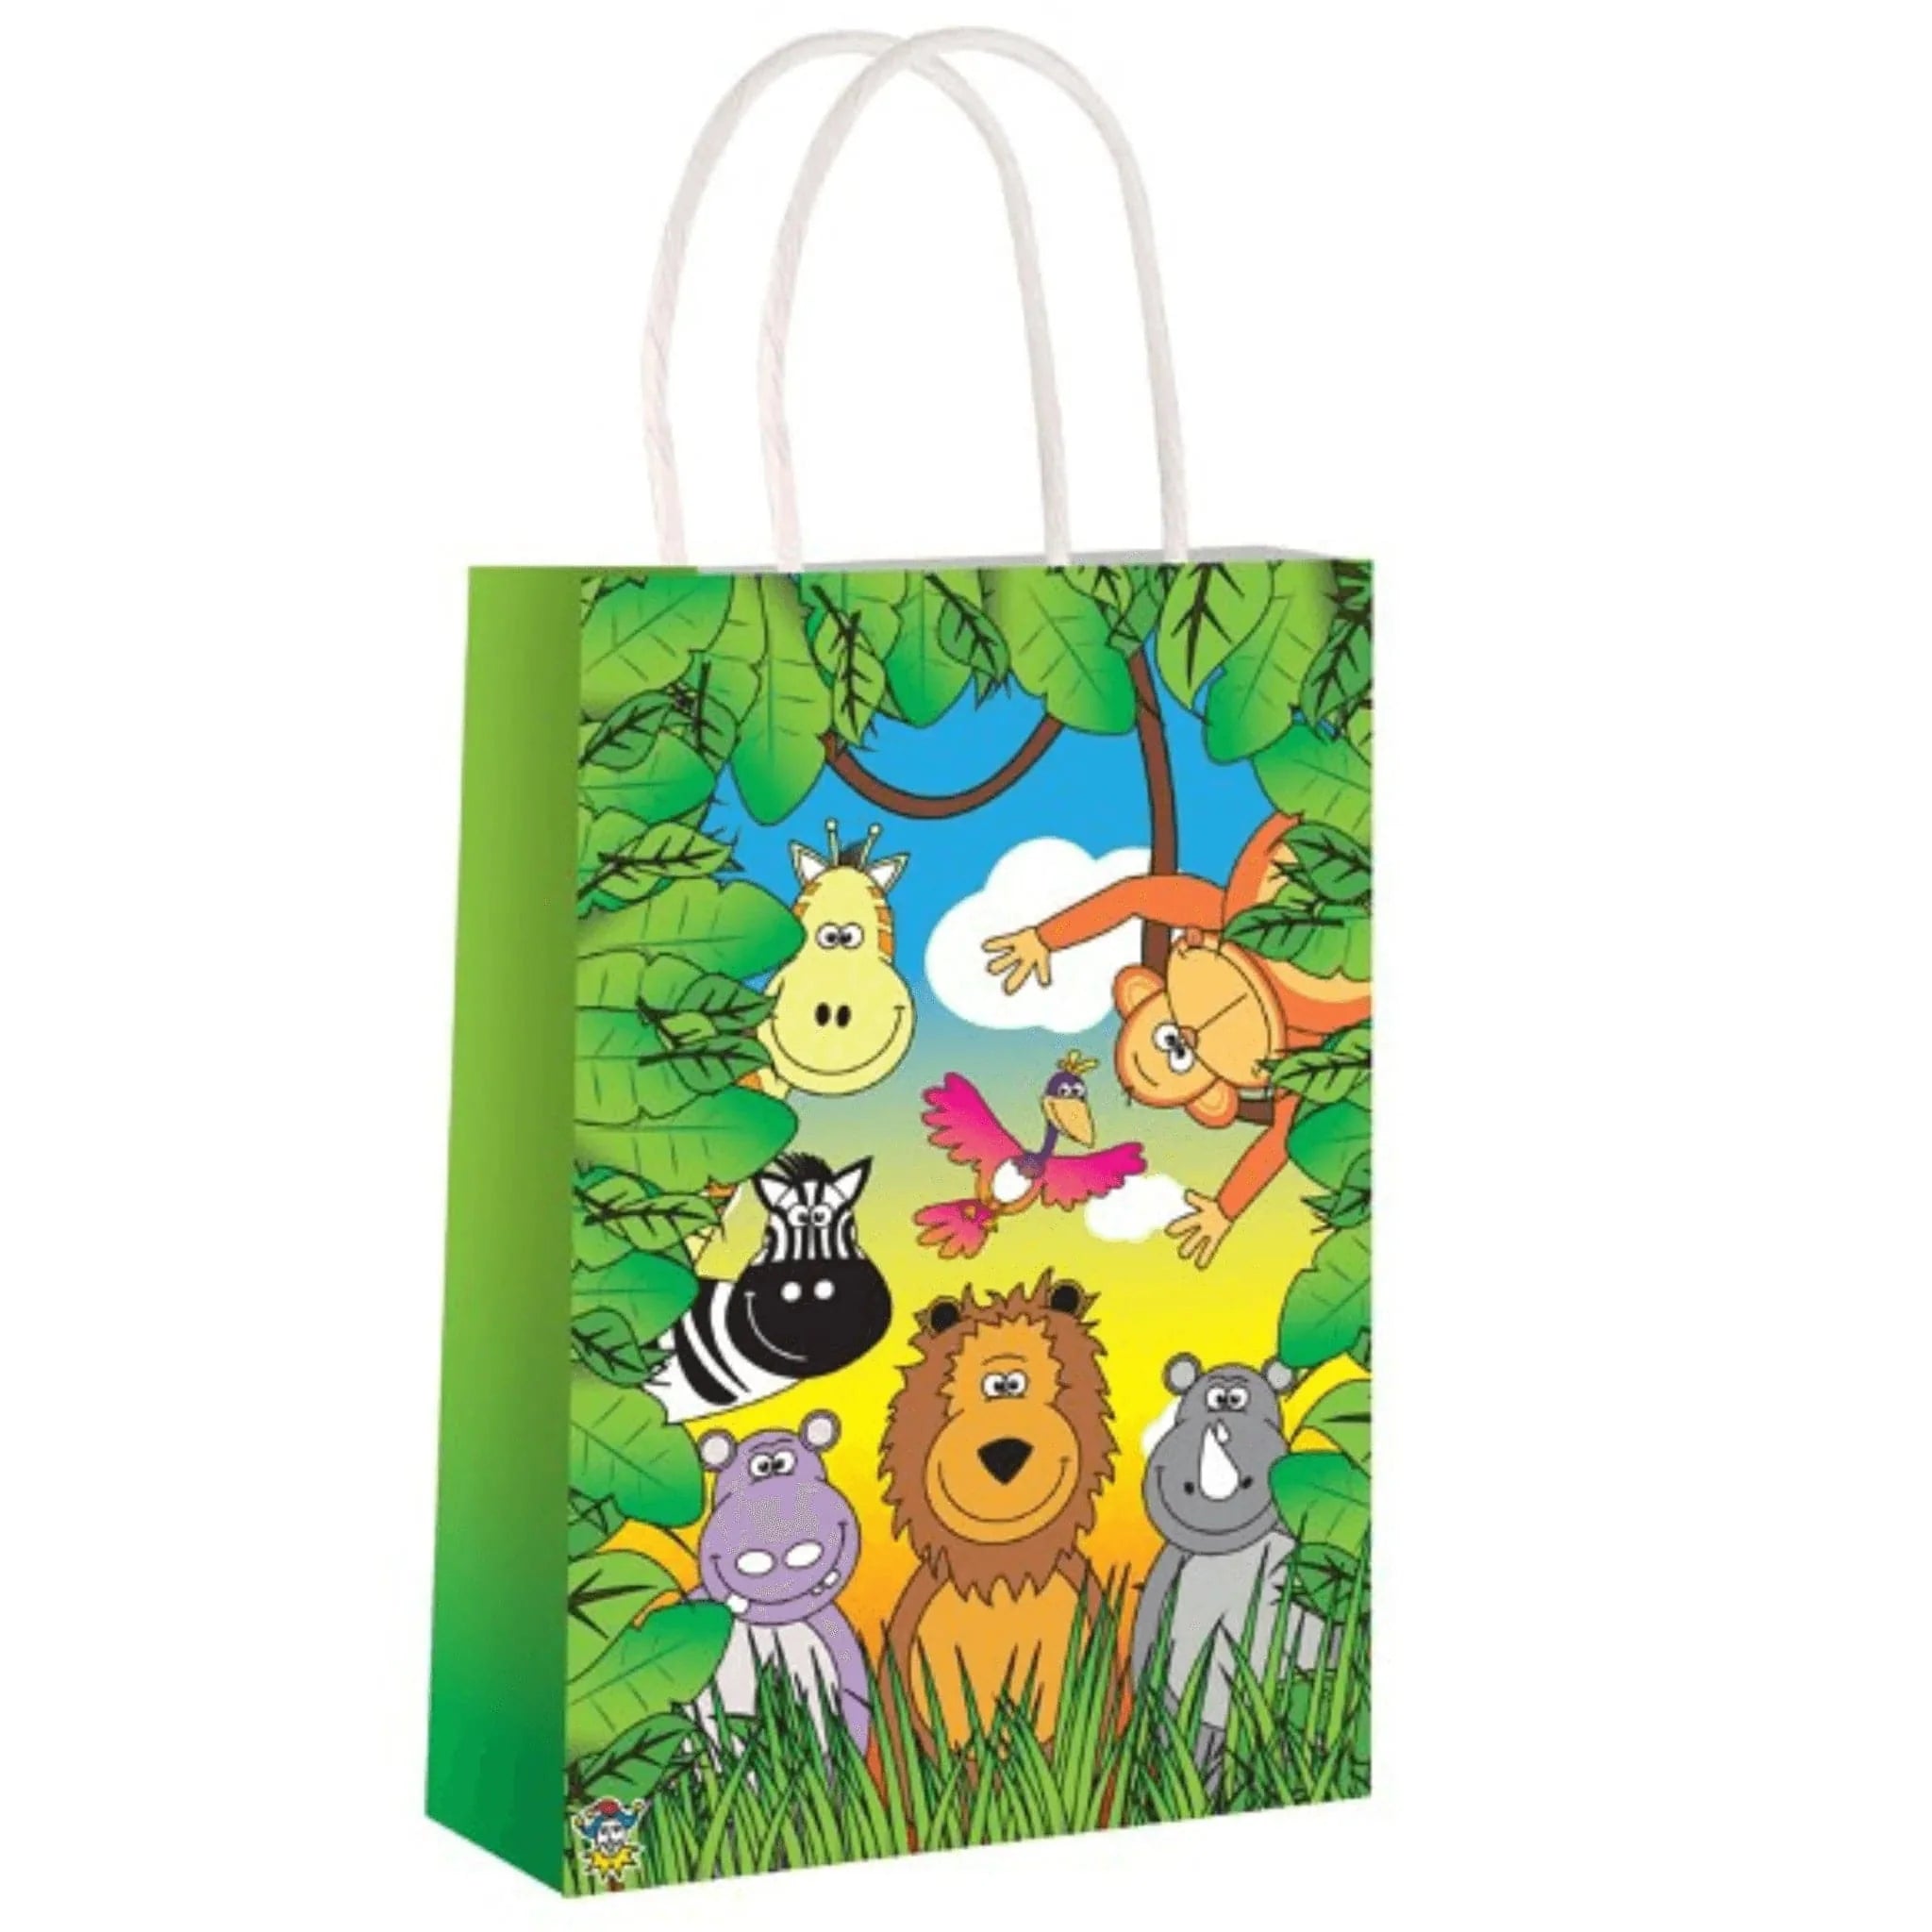 Jungle Party Bags - Kids Party Craft